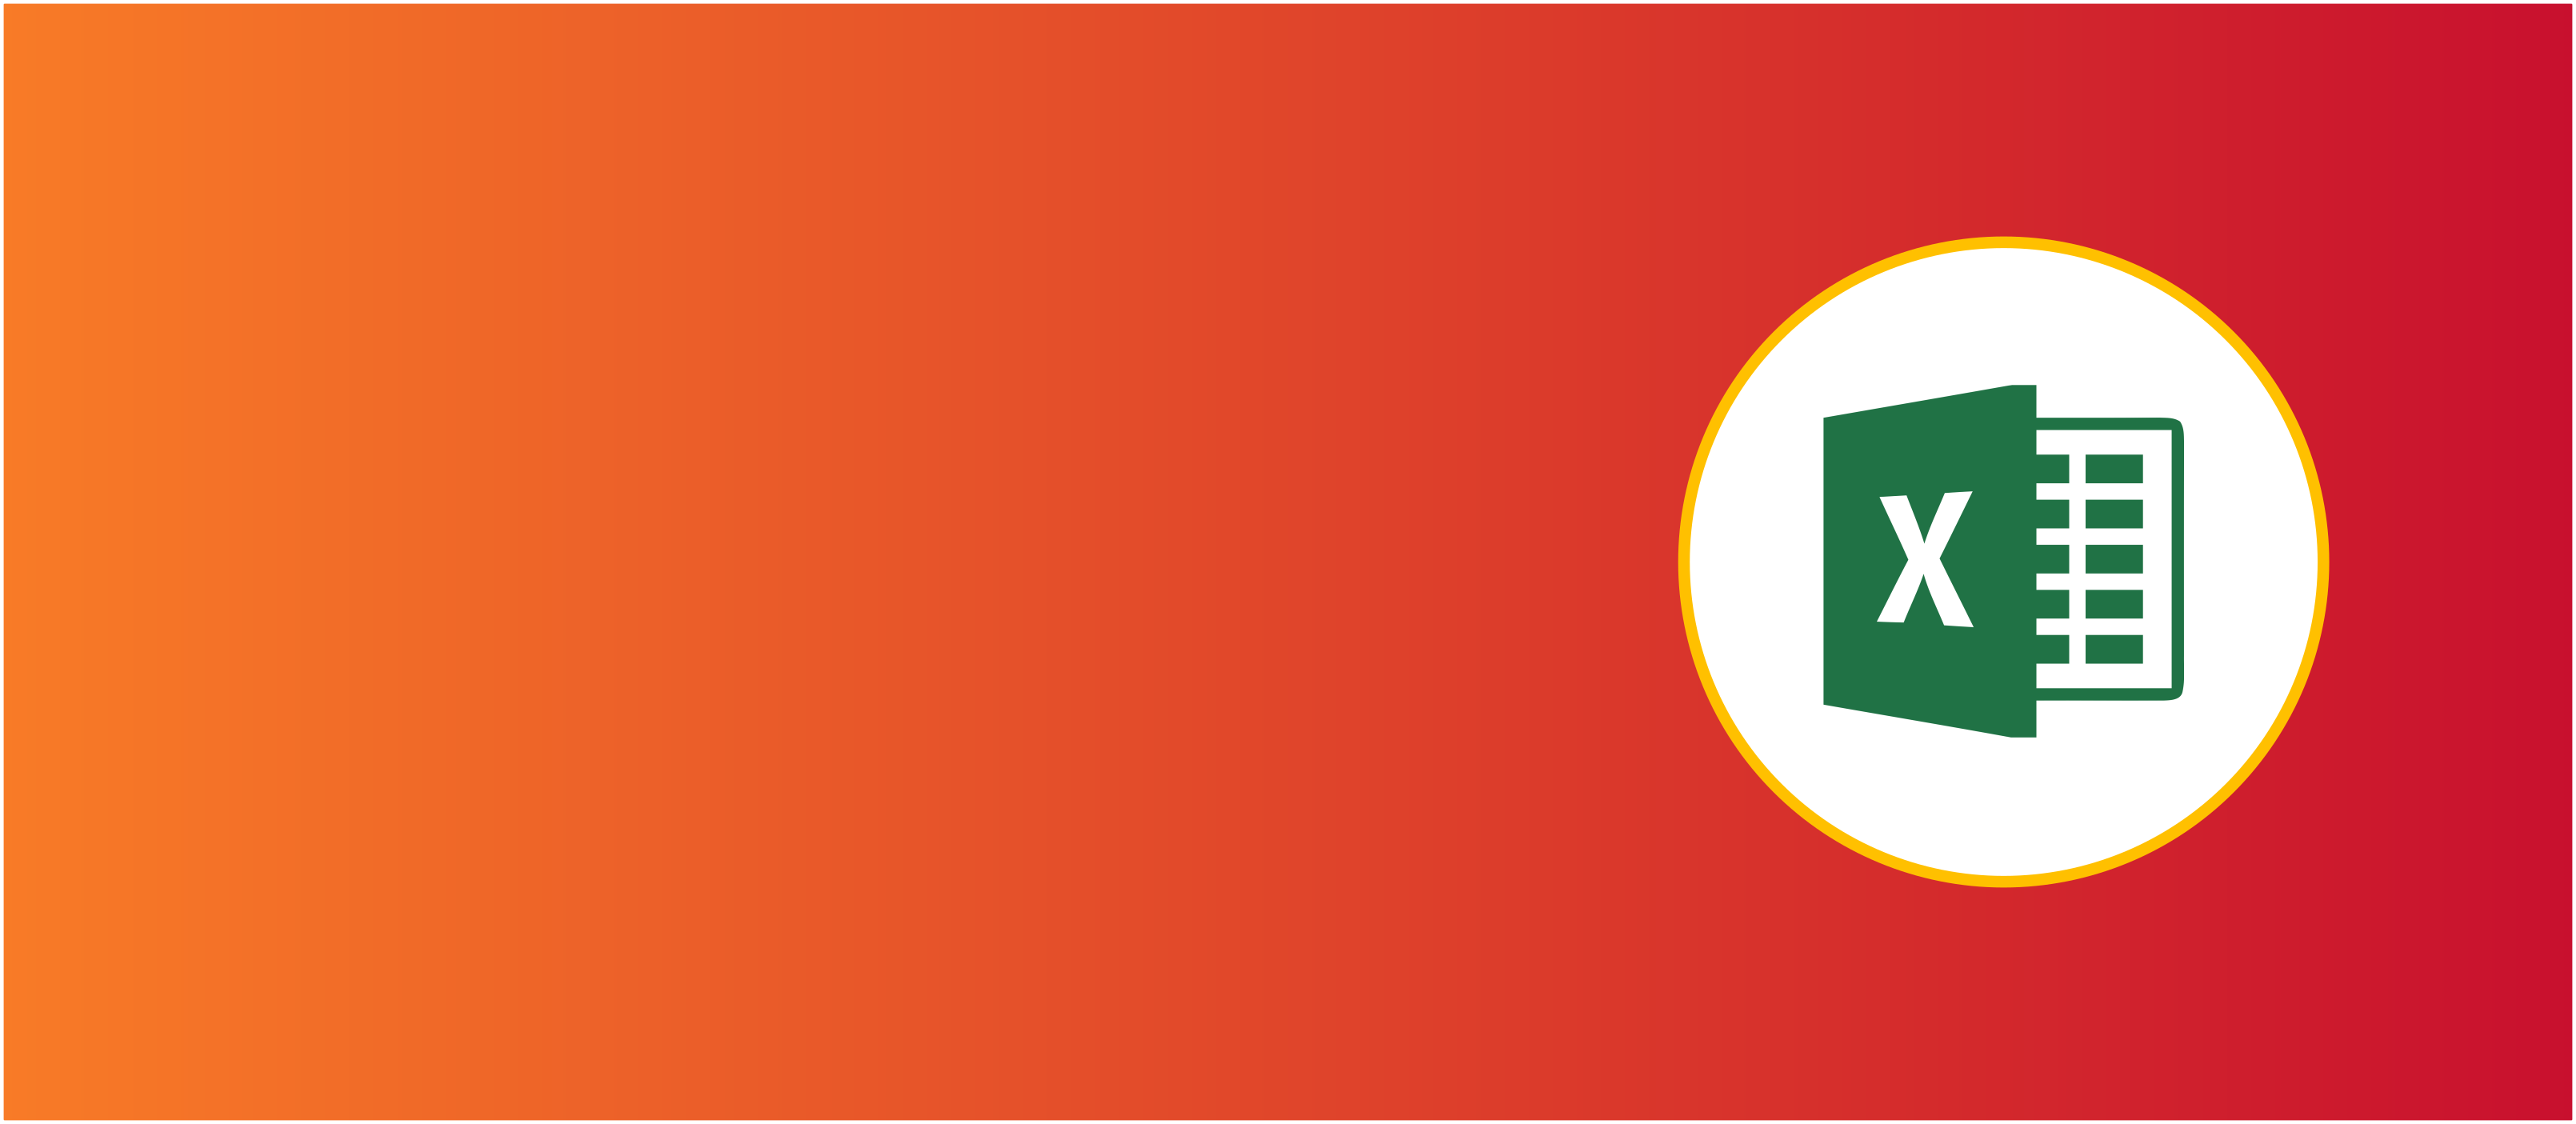 Microsoft Excel icon on a background of orange-to-red gradient